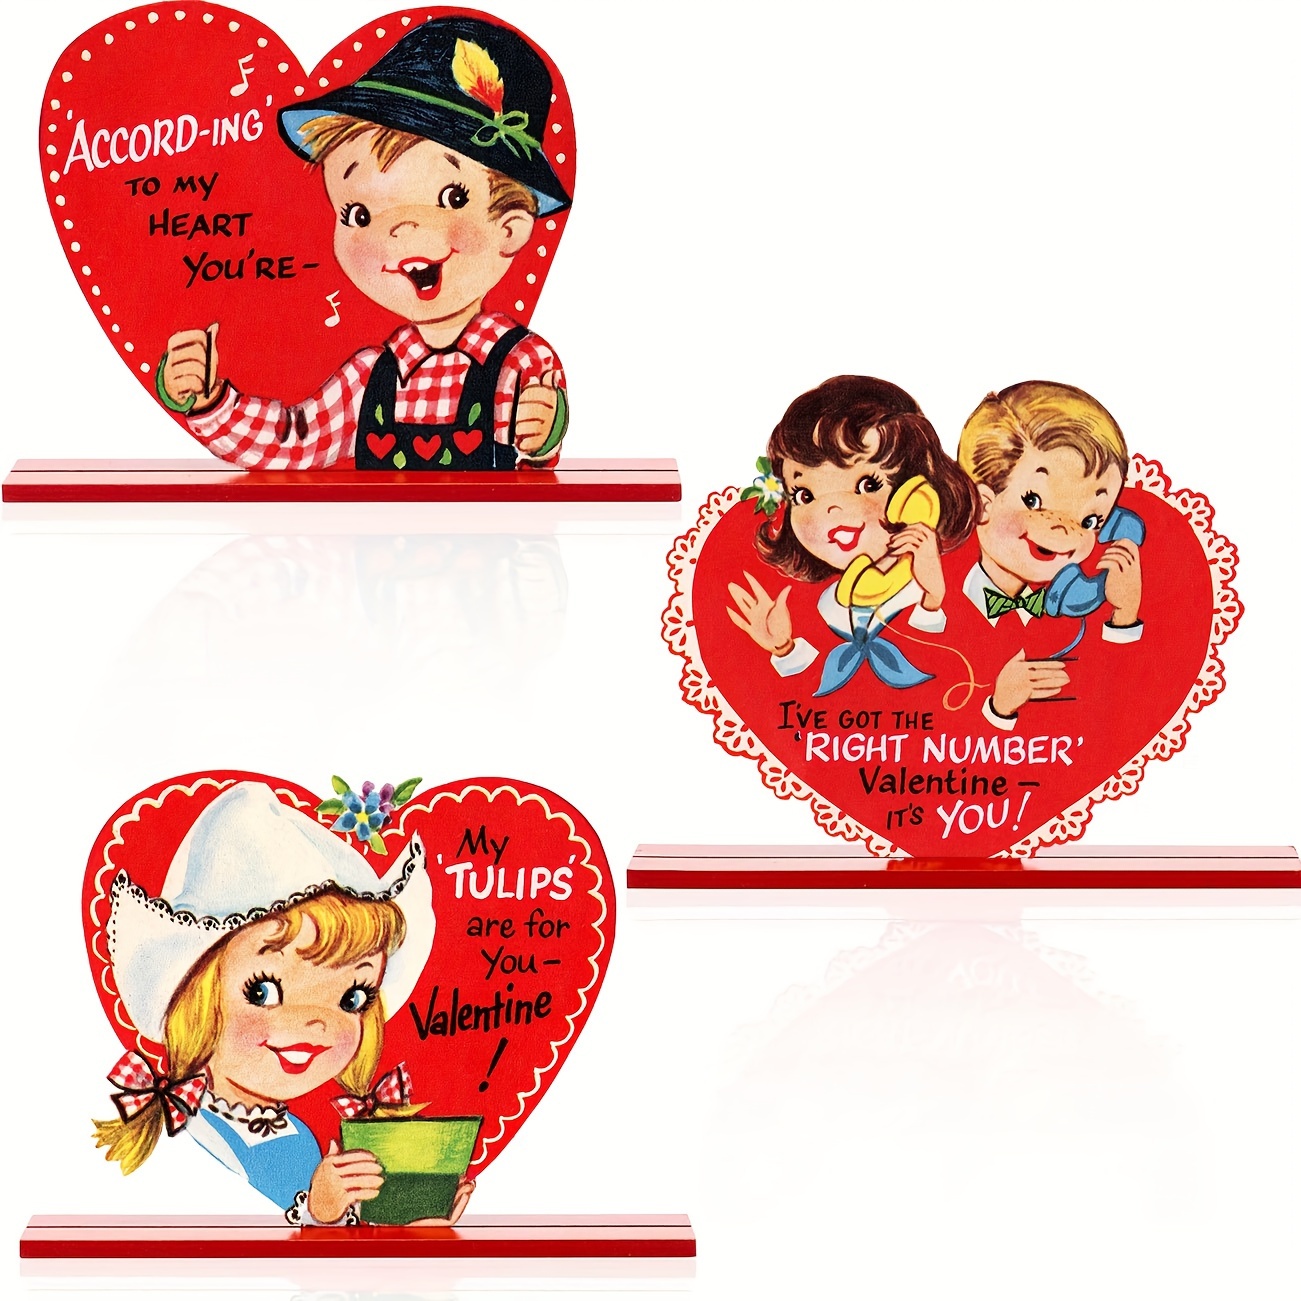  3 PCS Valentine's Day Wooden Sign Table Decor, Happy  Valentine's Tabletop Centerpiece XOXO Be Mine Valentine Decorations for  Tables, Valentine's Day Gifts Wood Love Heart Desk Mantle Shelf Decoration  : Home